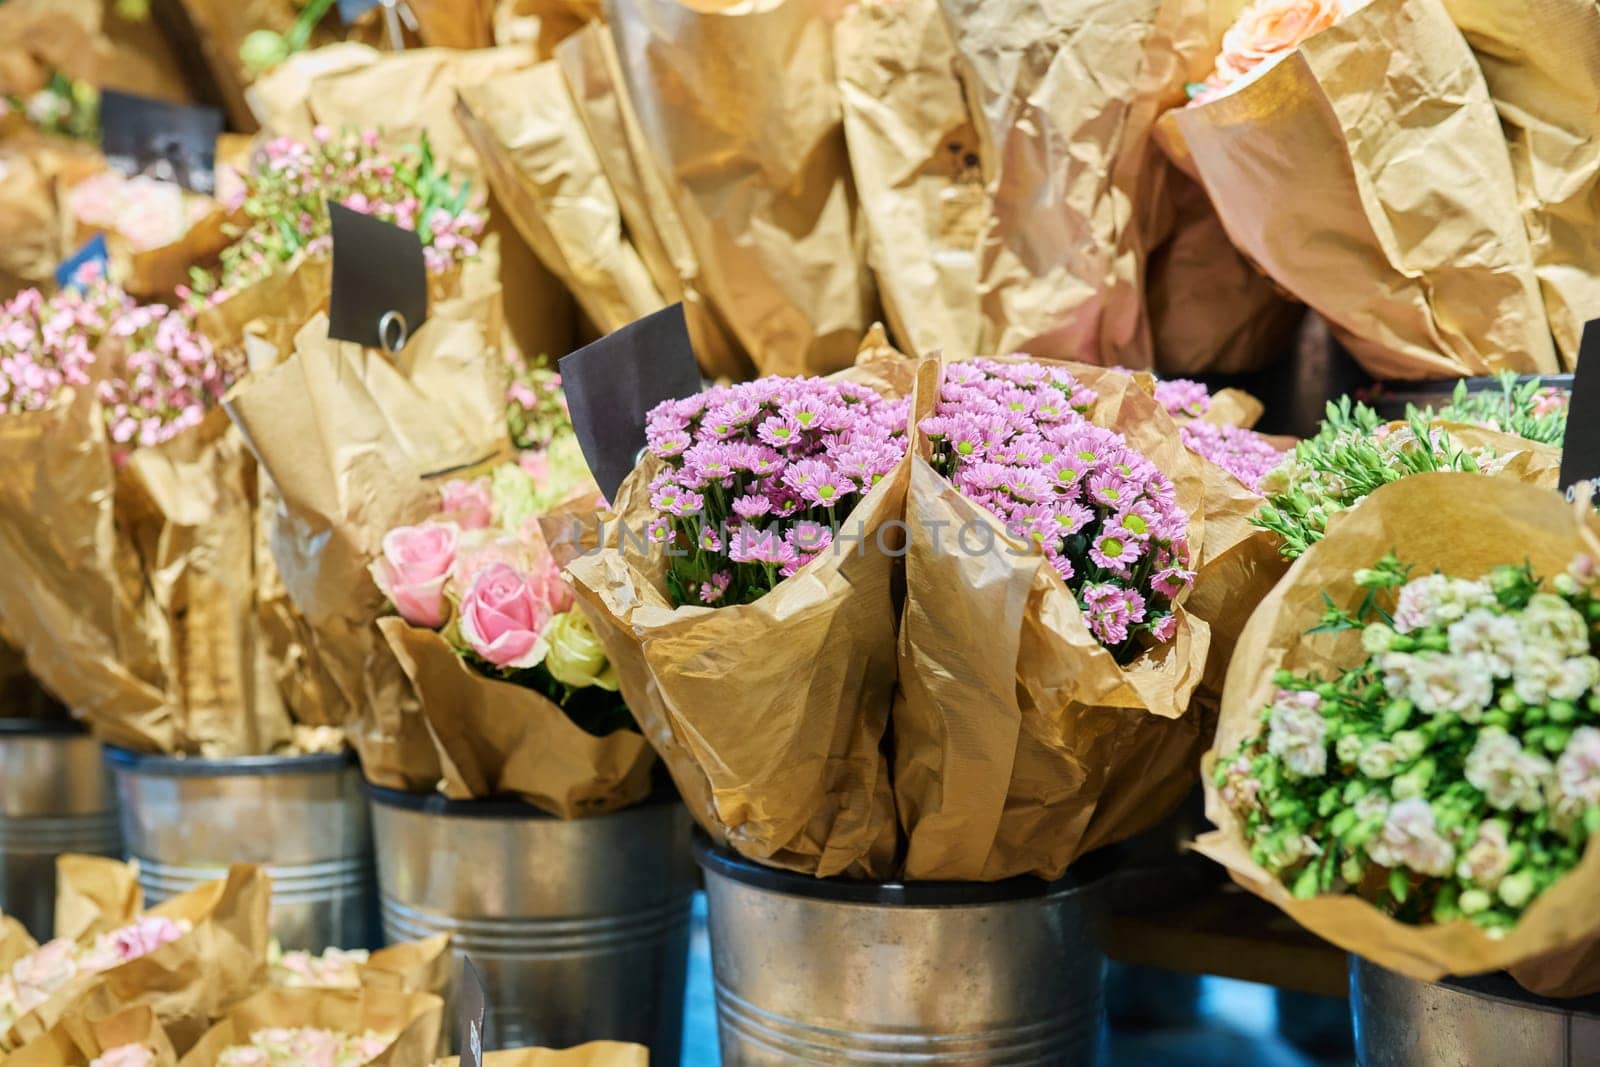 Flower shop, close-up of fresh flowers in buckets, pink chrysanthemums. Floristics, small business, flower decoration of apartments, houses, offices, gifts for holidays, summer autumn season